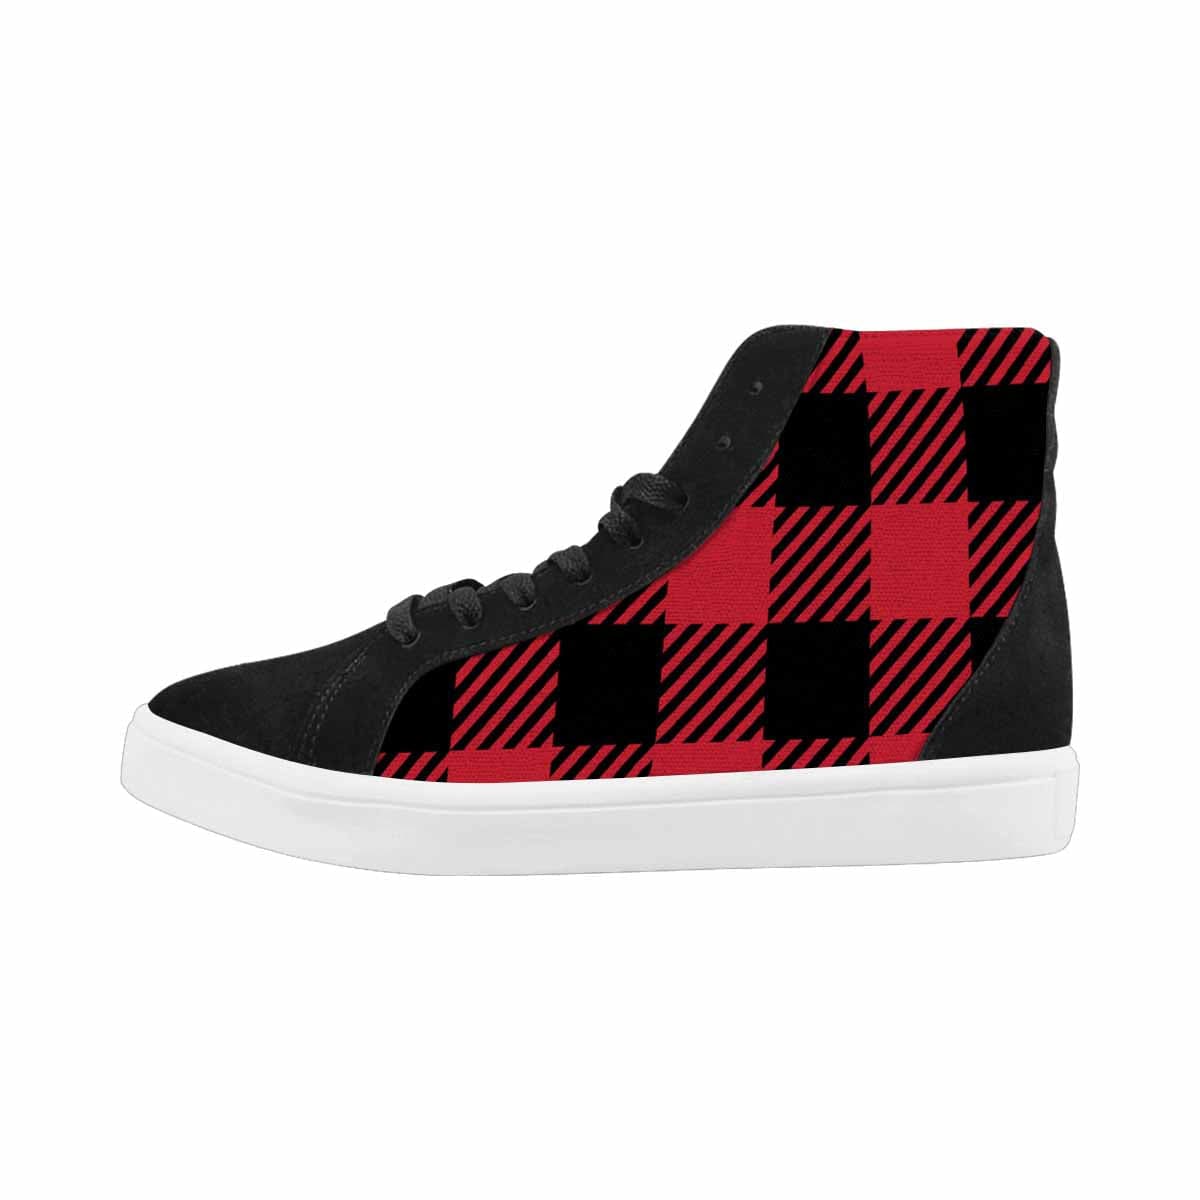 Sneakers For Women, Buffalo Plaid Red And Black - High Top Sports Shoes-1